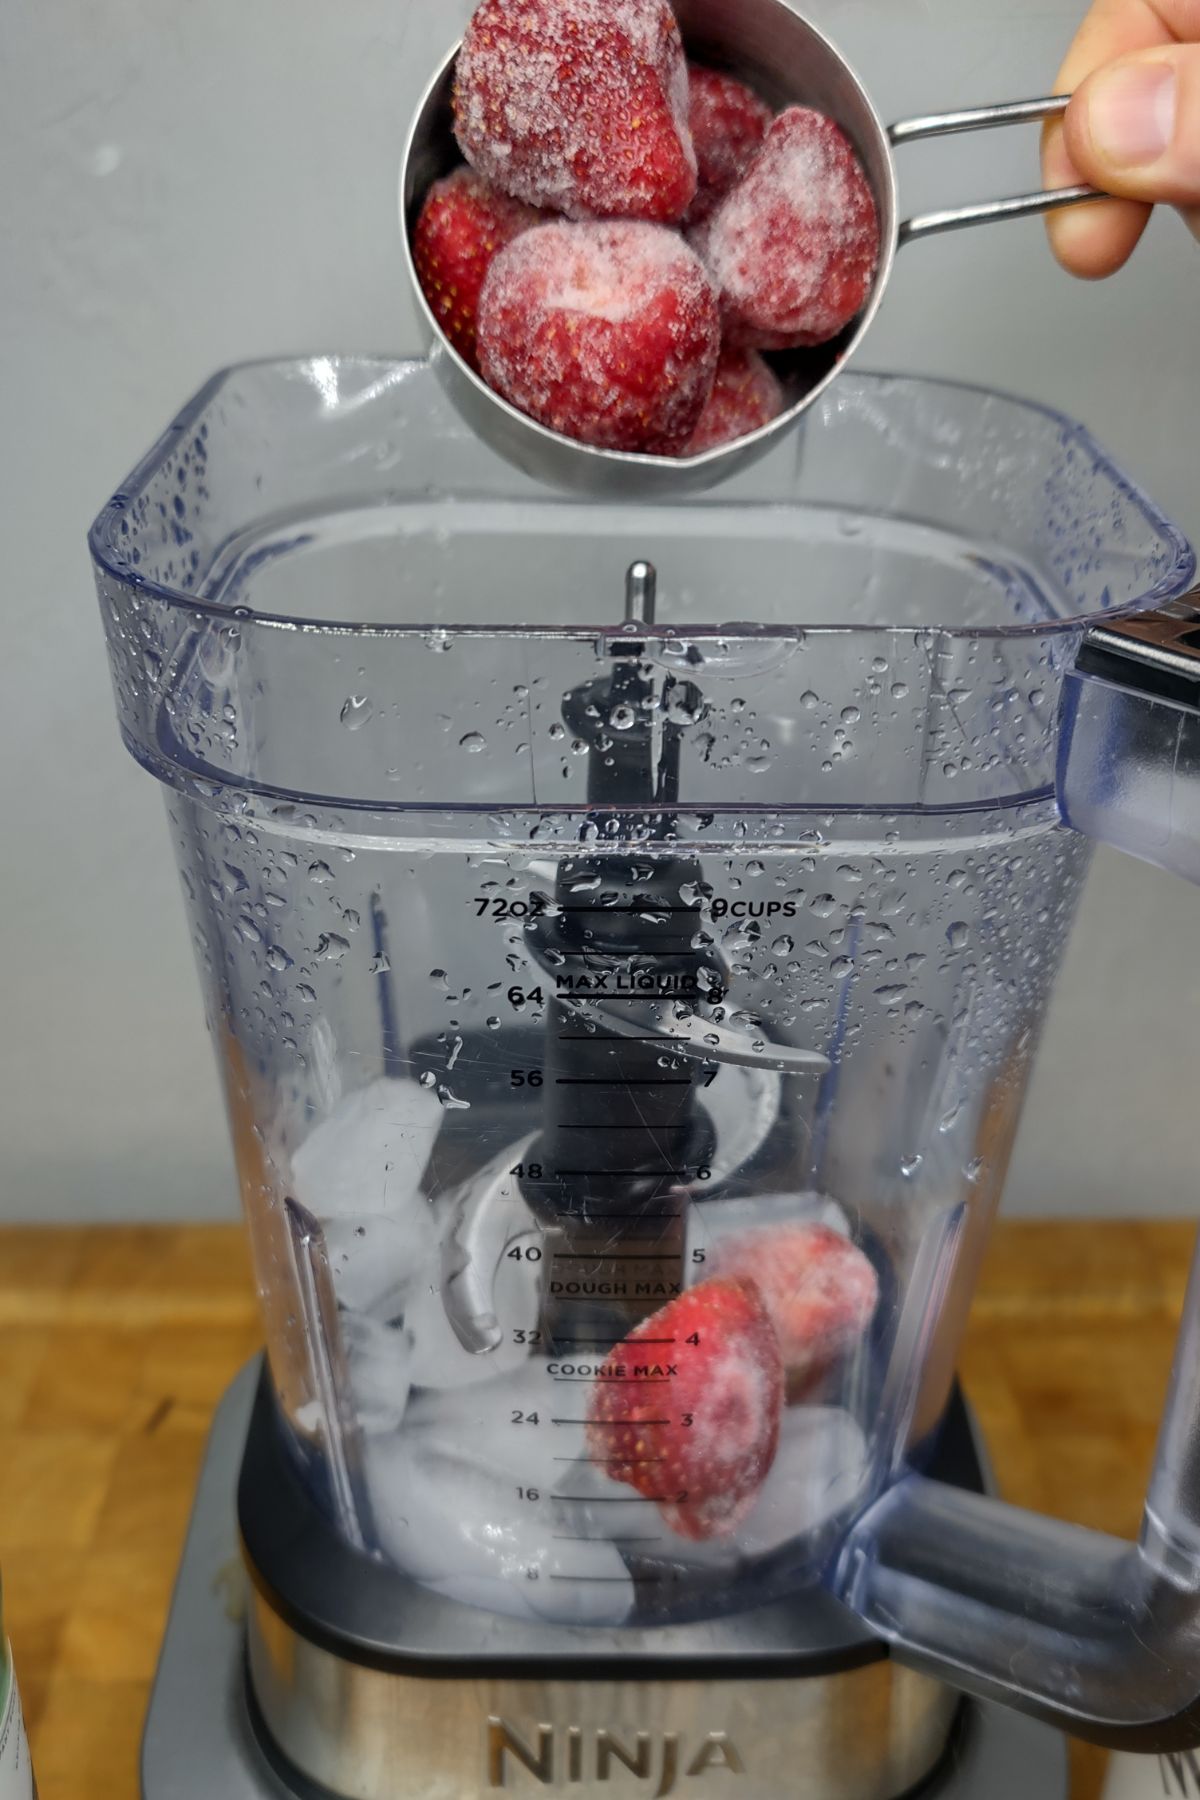 Adding strawberries to a blender.